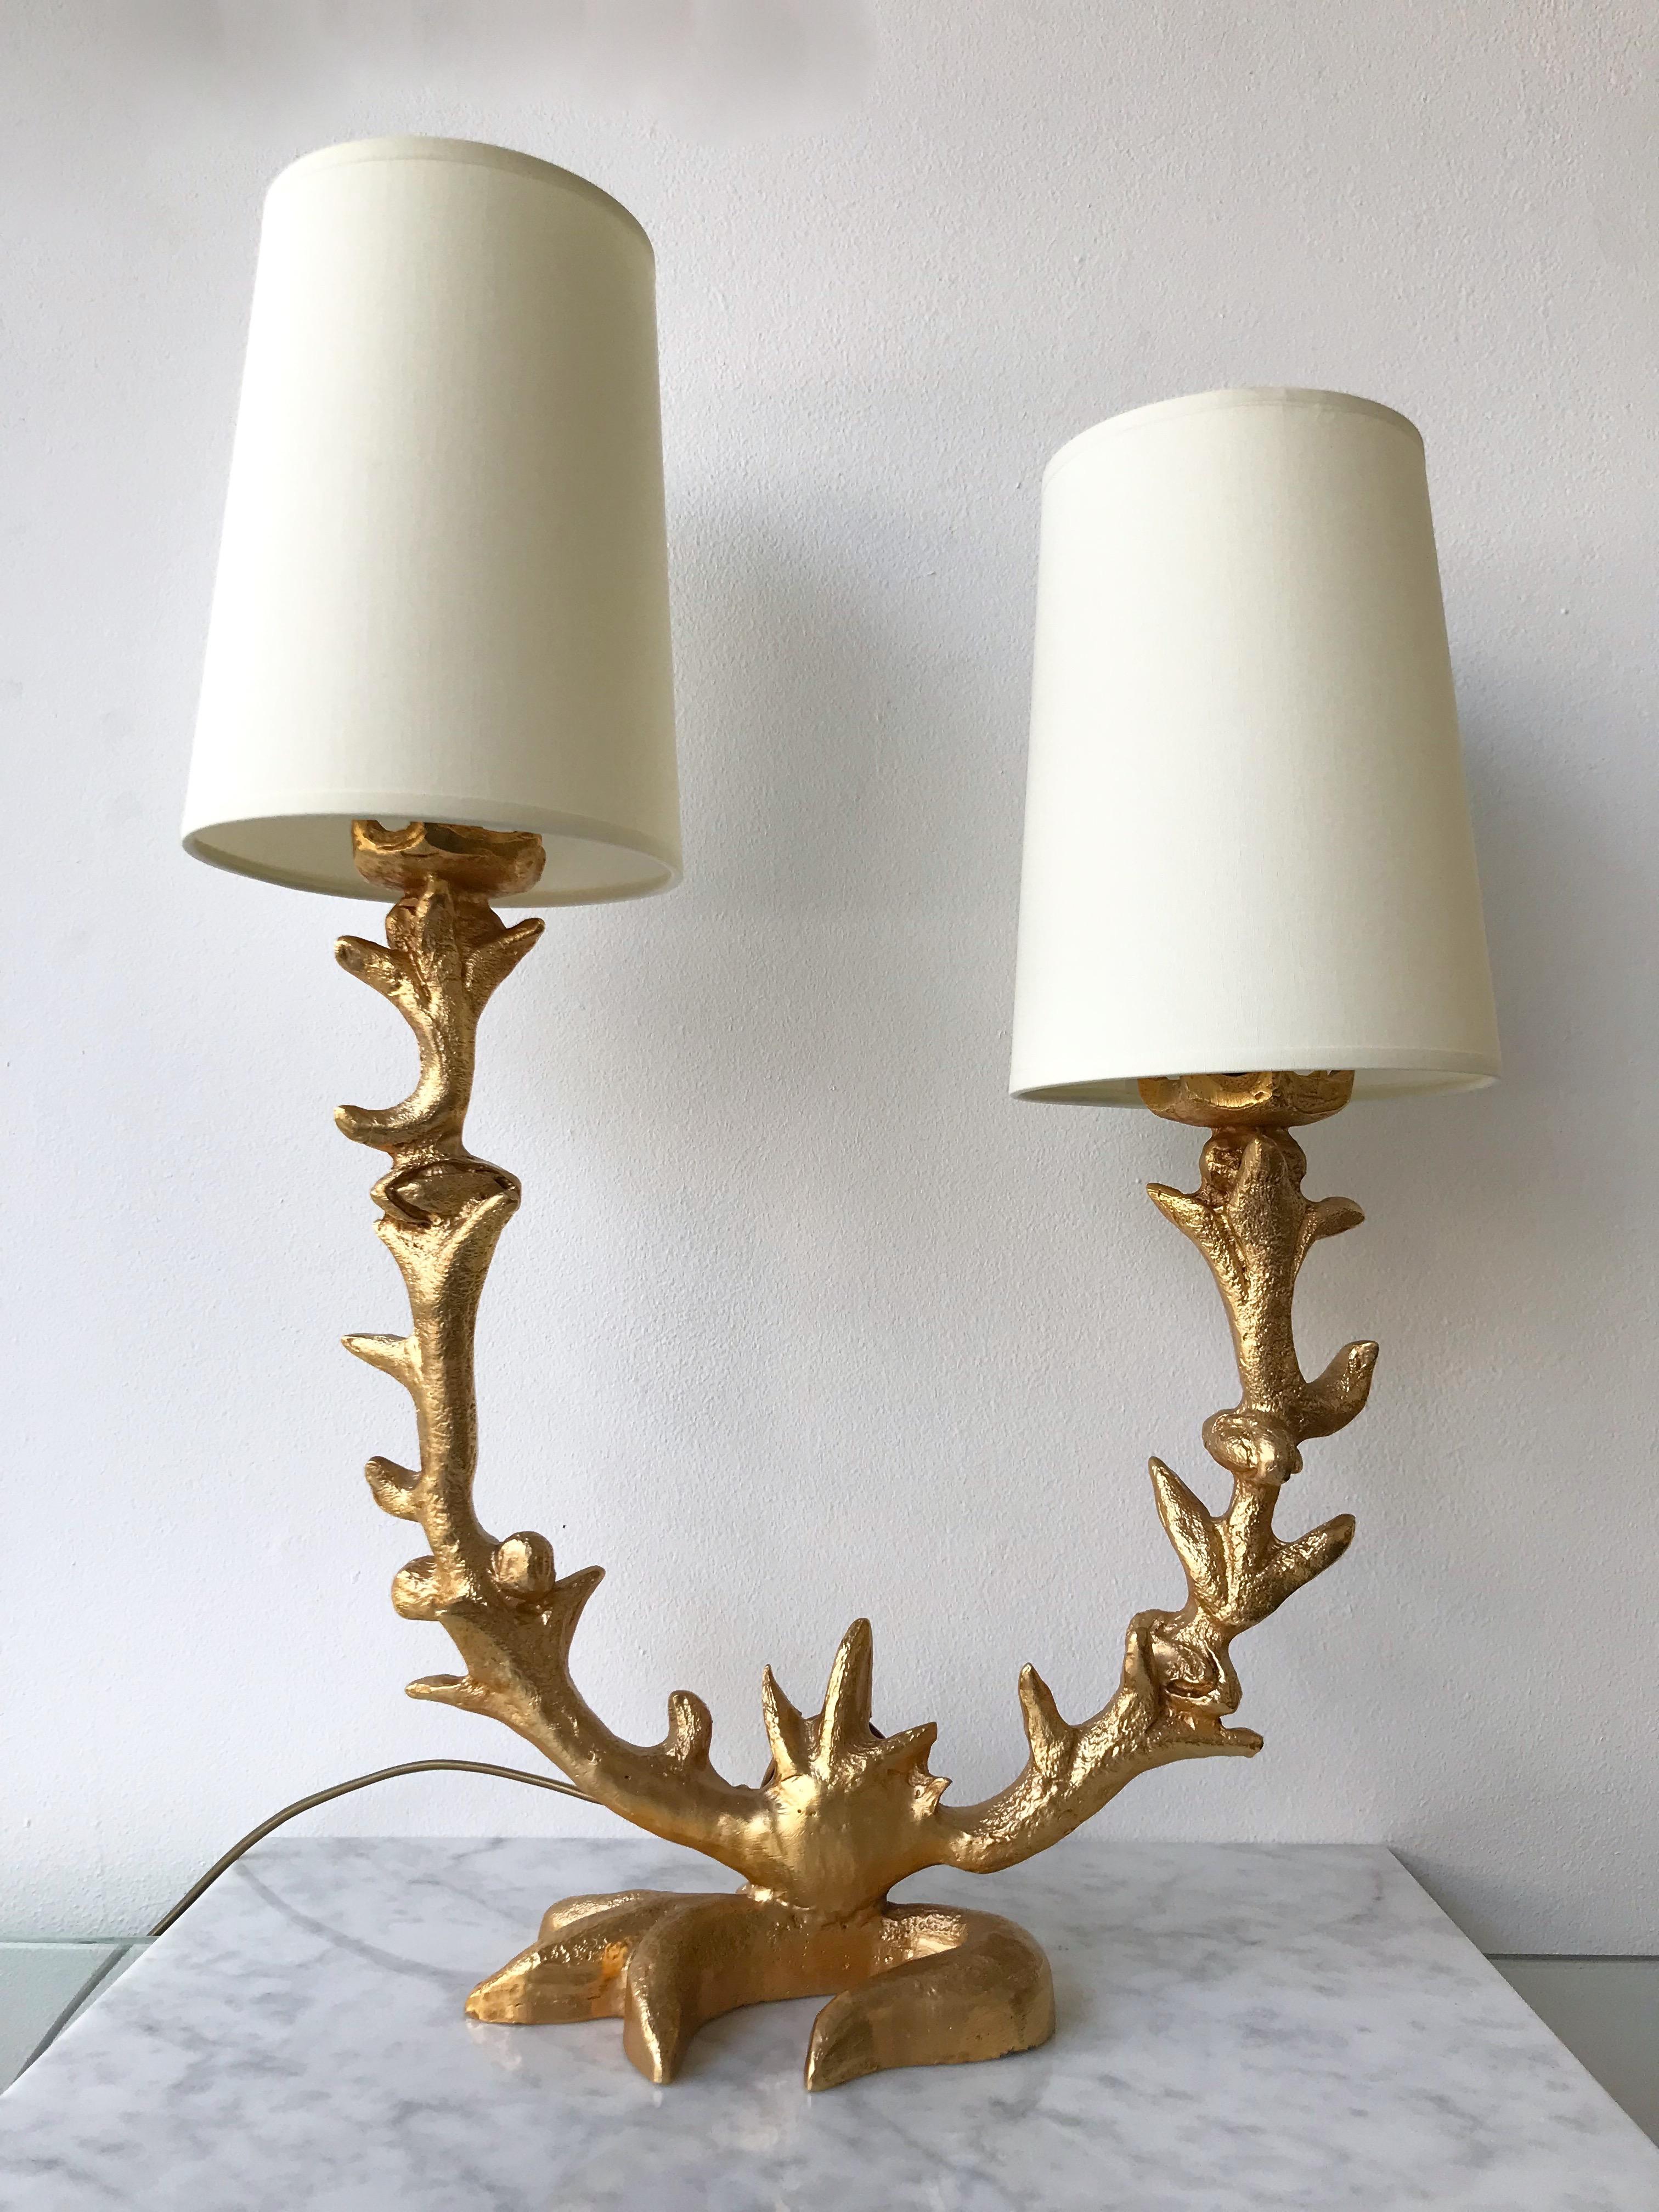 Italian Pair of Lamps by Mathias for Fondica, France, 1995